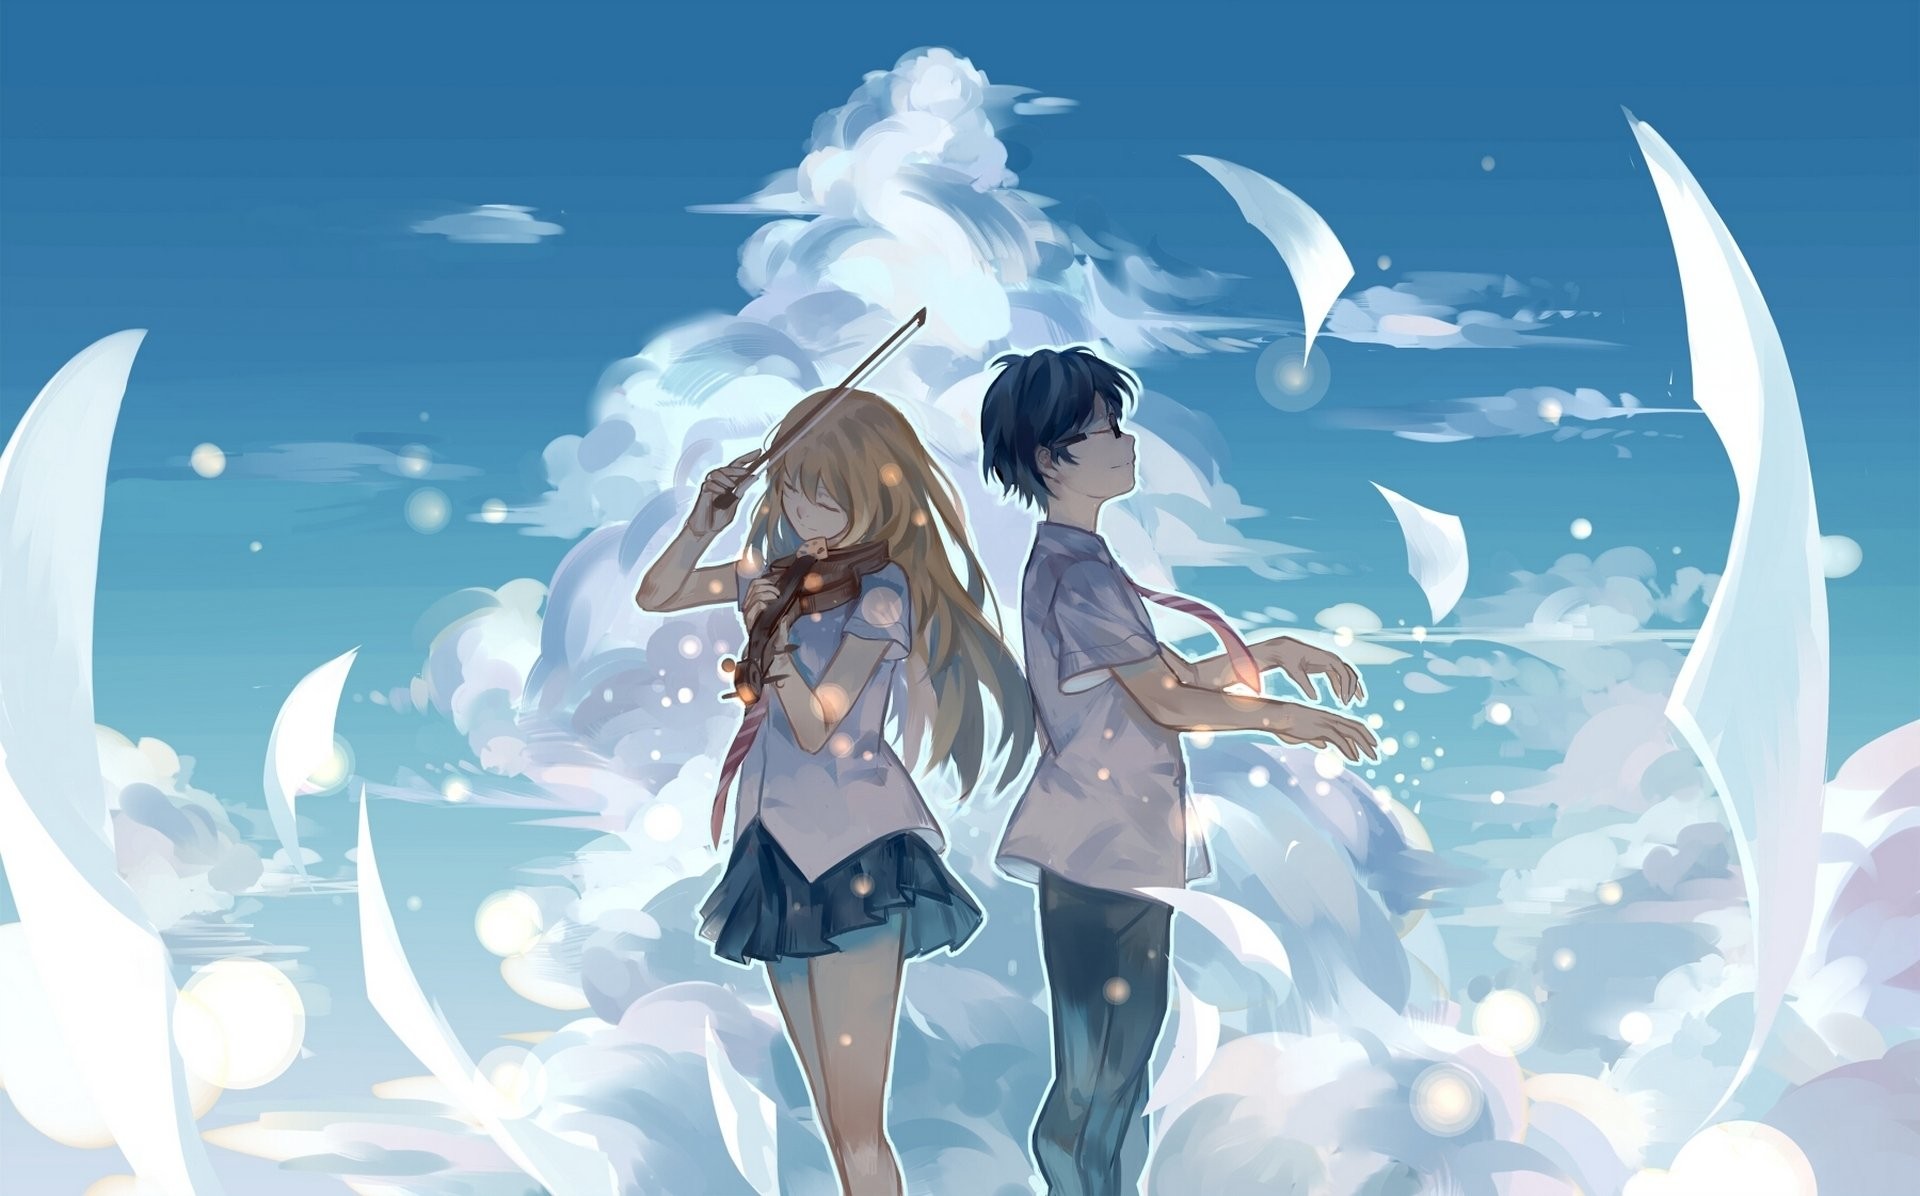 A couple standing on clouds playing the violin - April